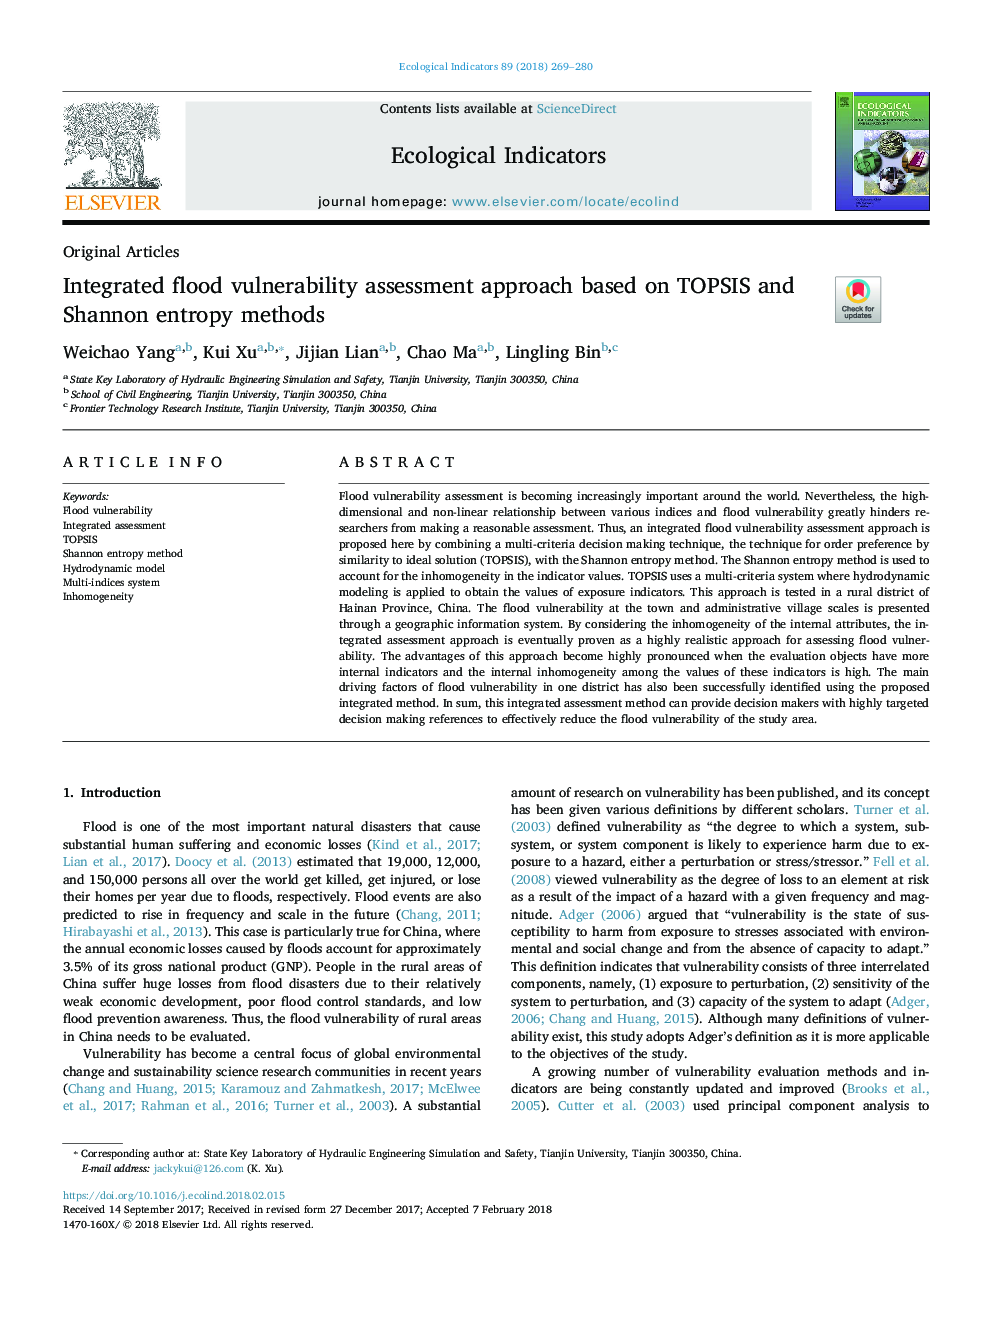 Integrated flood vulnerability assessment approach based on TOPSIS and Shannon entropy methods